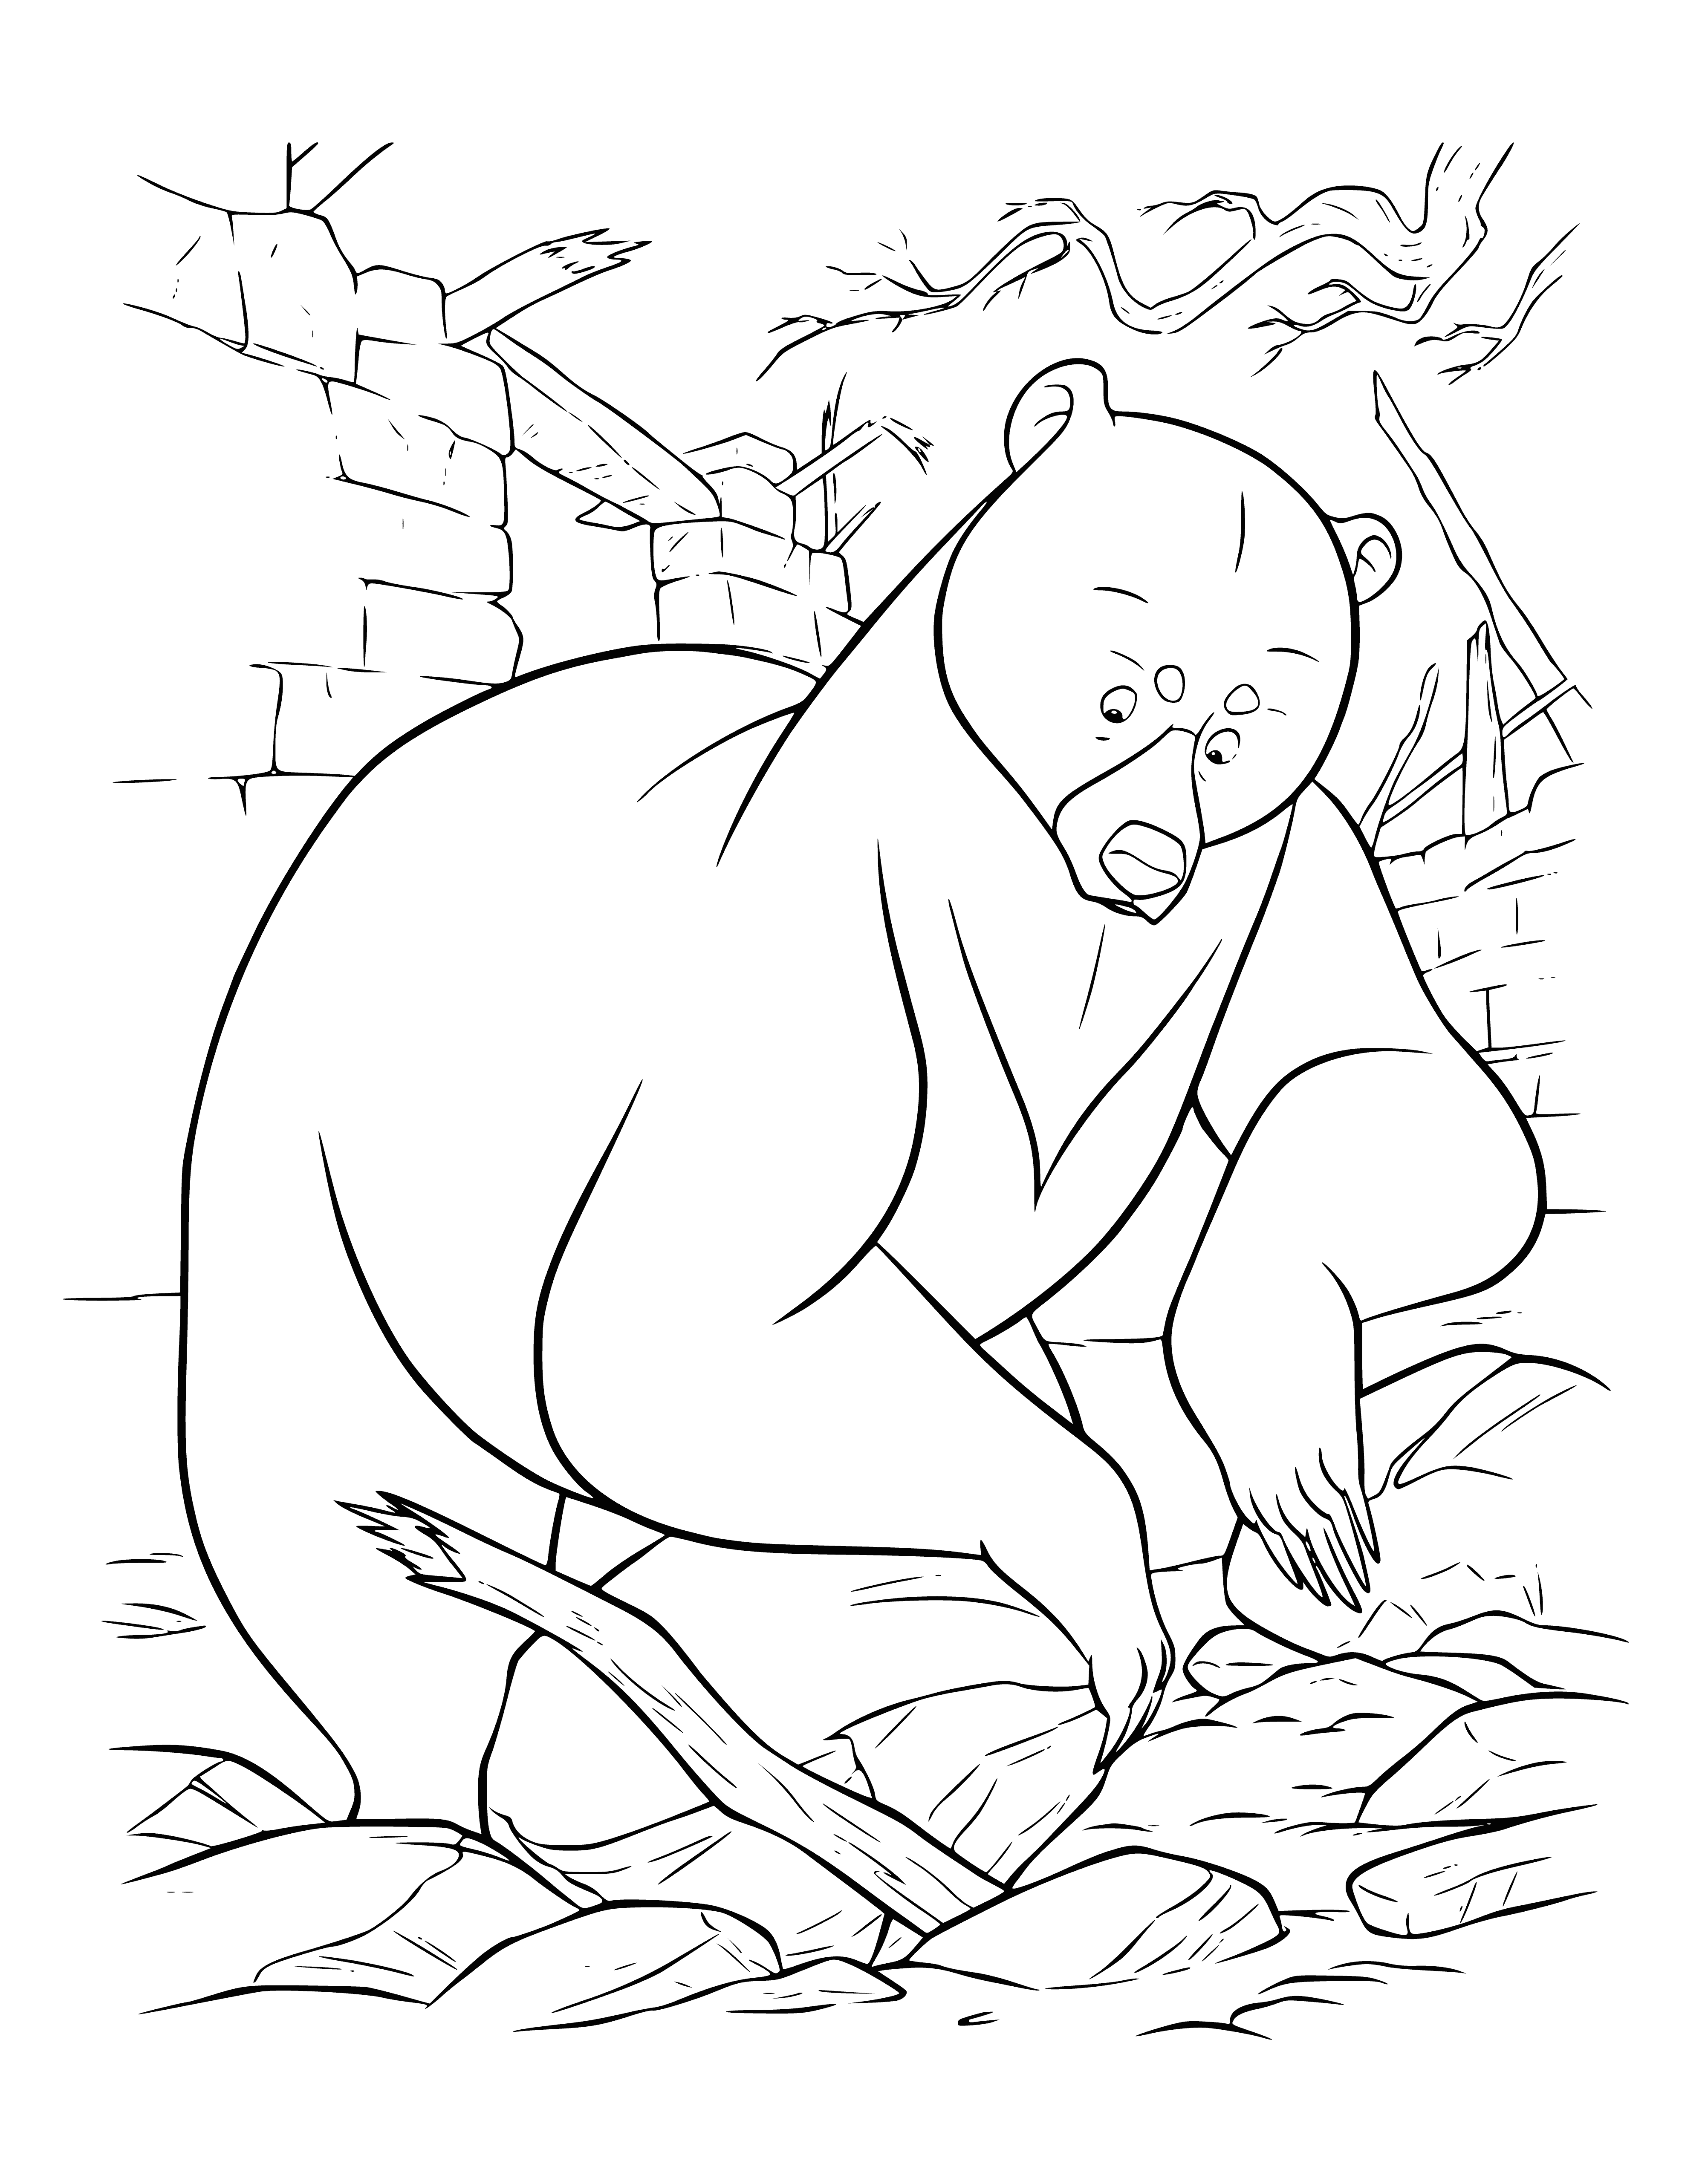 coloring page: Bear raking stones with paw.